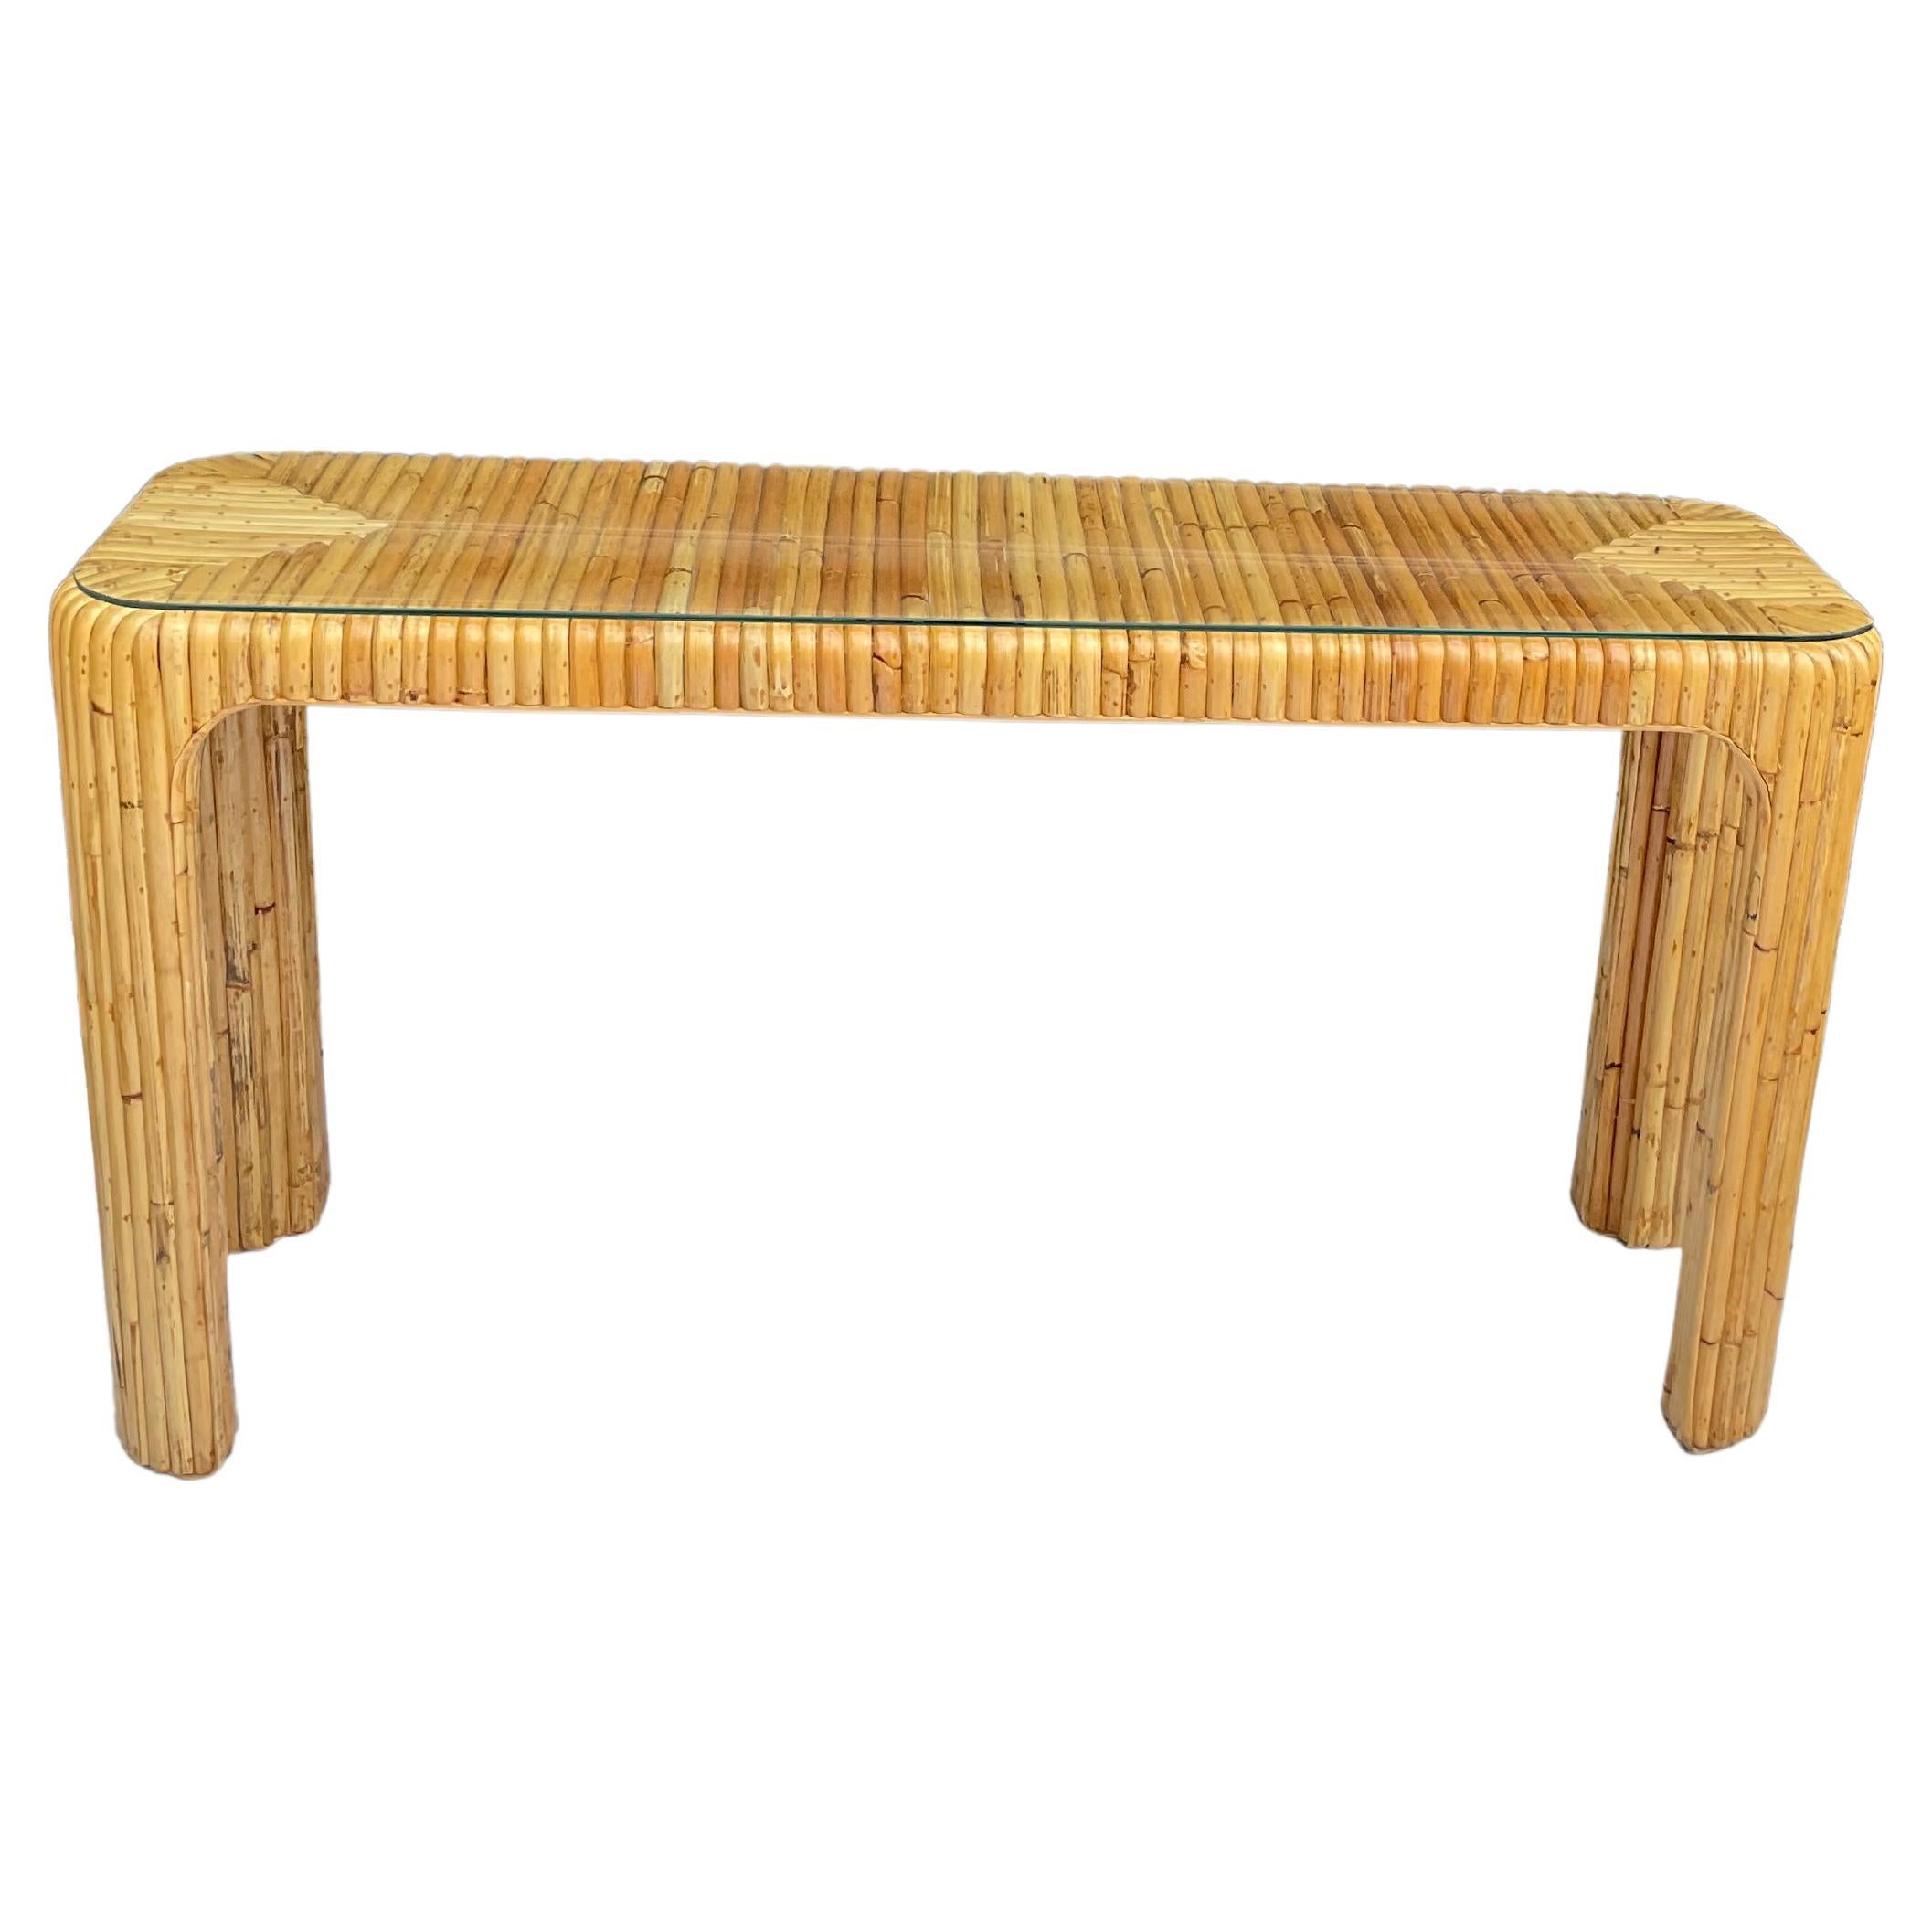 1980s Rattan Waterfall Style Console Table